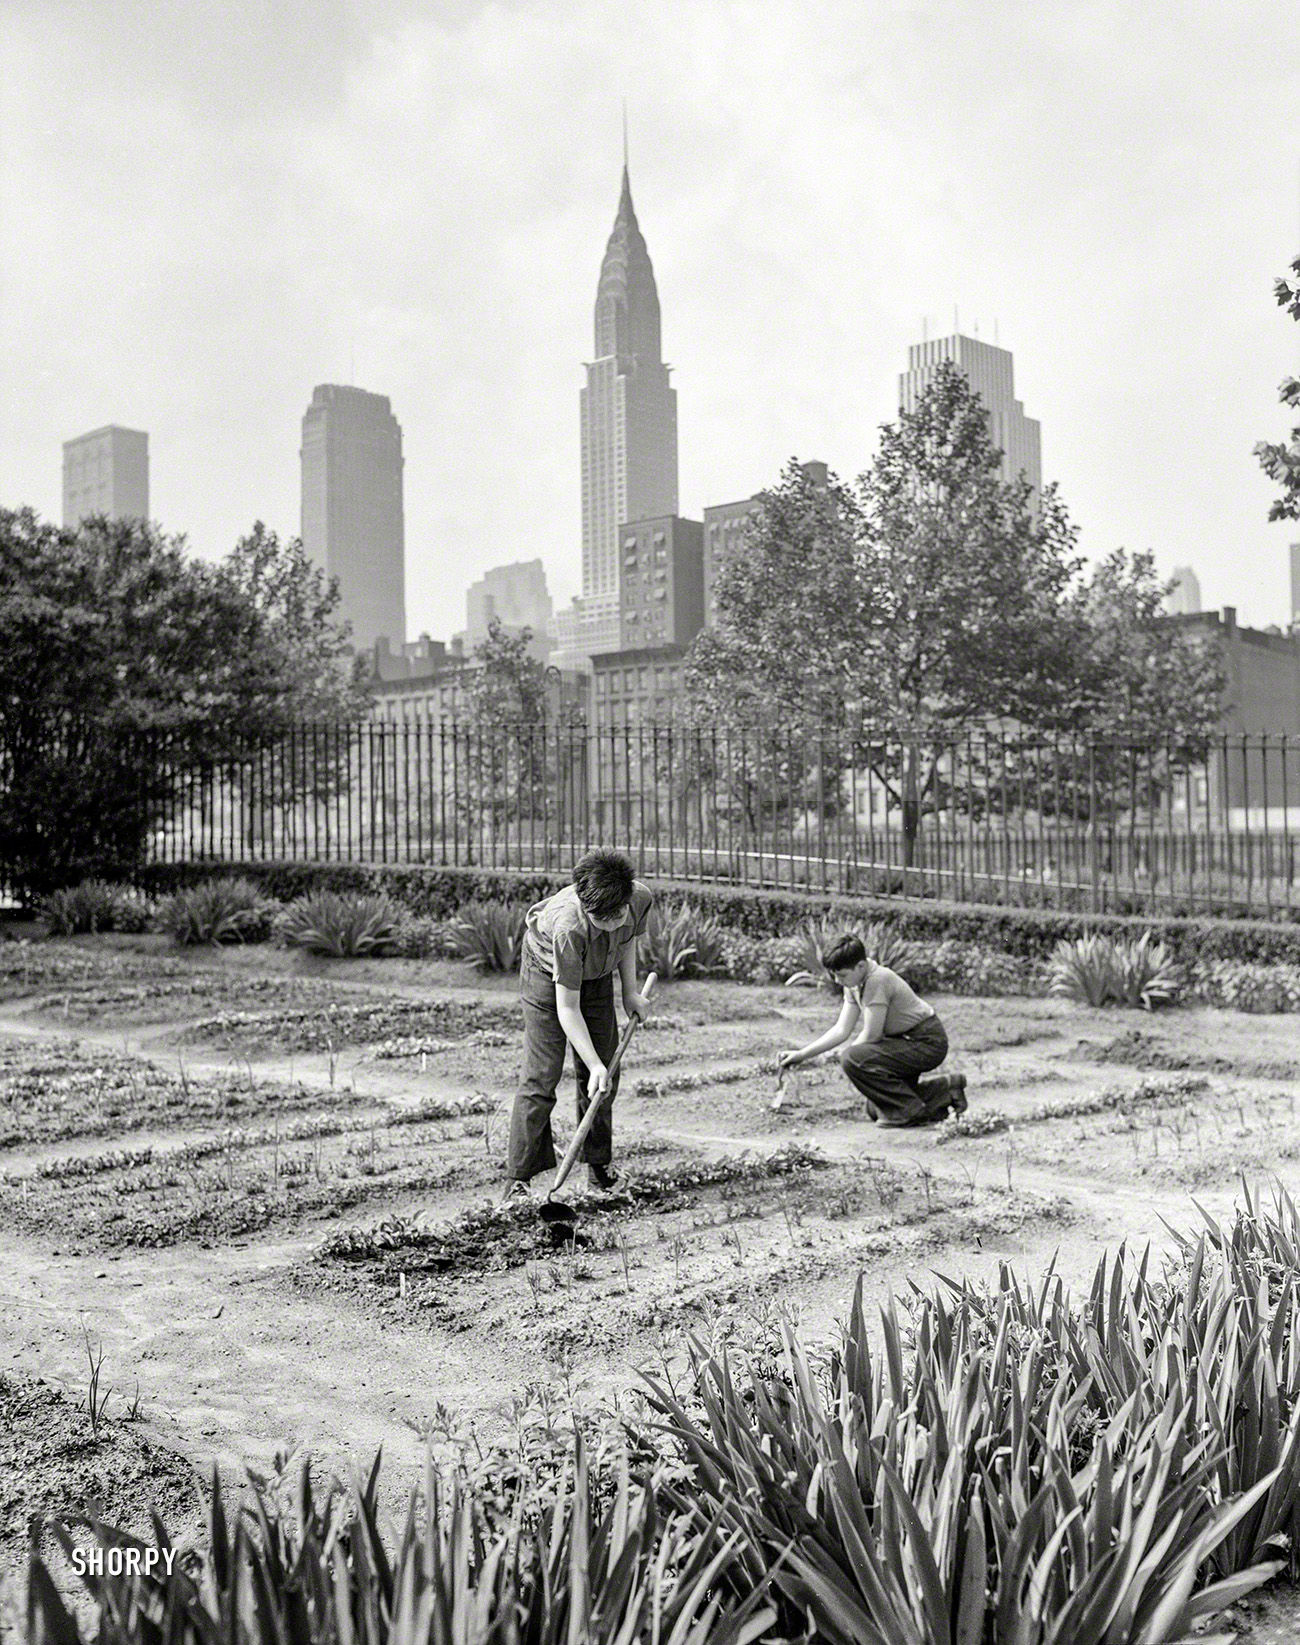 June 1944. "New York. School victory garden on First Avenue between 35th & 36th streets." Photo by Edward Meyer, Office of War Information. View full size.